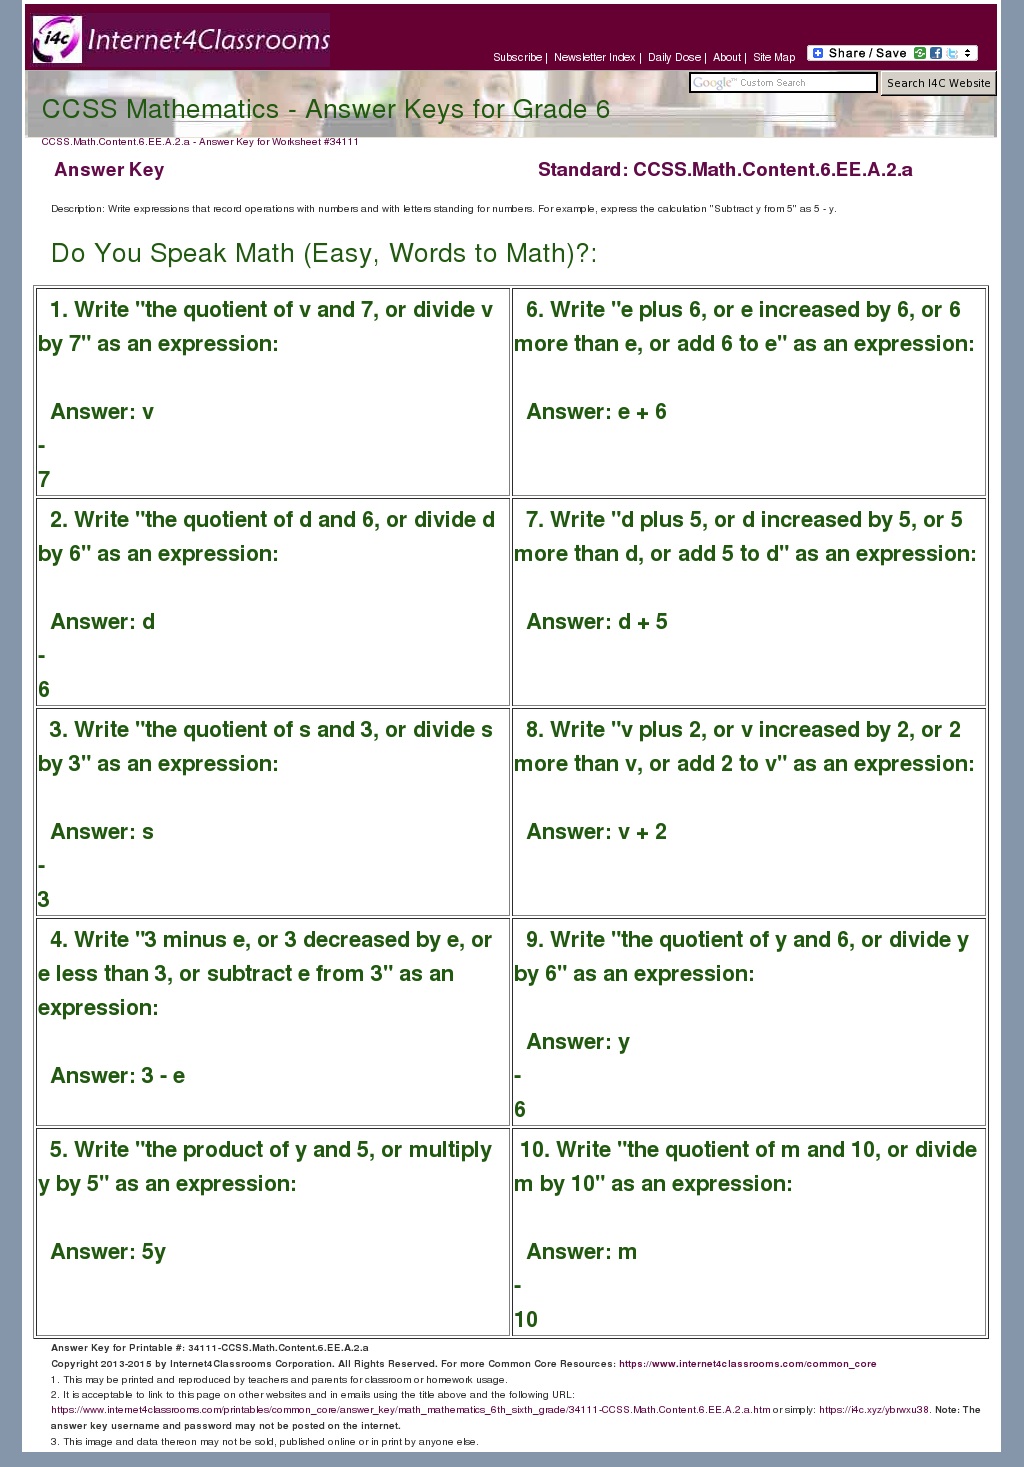 answer-key-download-worksheet-34111-ccss-math-content-6-ee-a-2-a